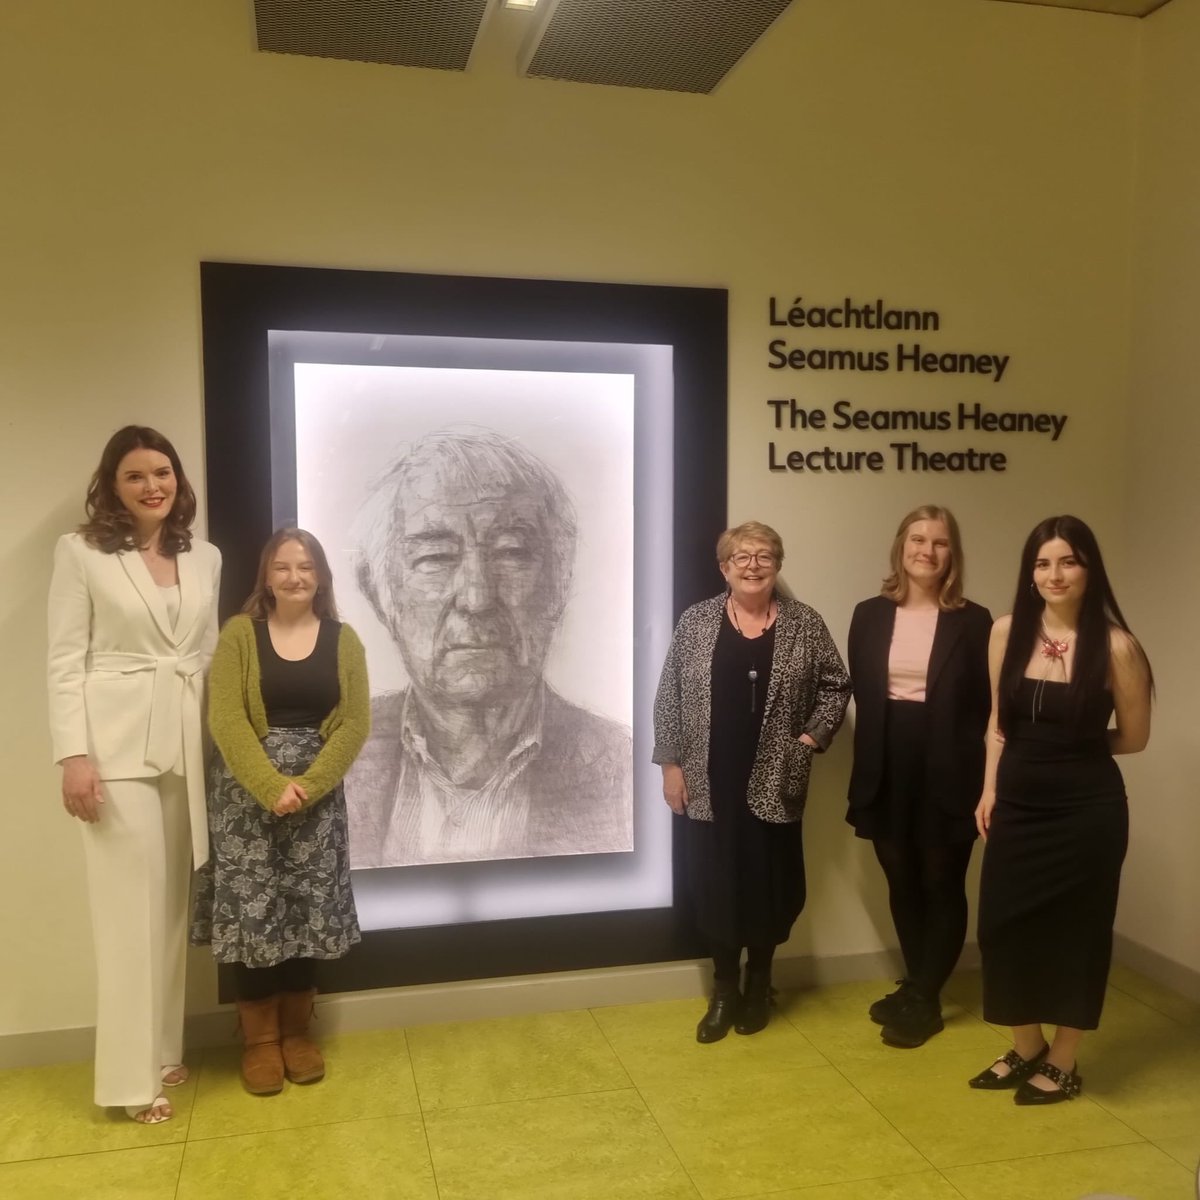 “A thank-offering” this evening was a special celebration of Seamus Heaney’s life, legacy and links with @DCU. Delighted to be joined by Marie & Christopher Heaney, as well as @missflannery, Marina Carr, Mícheál McCann, Barry Devlin, @treabhair & @DCUSchoolofEng student poets